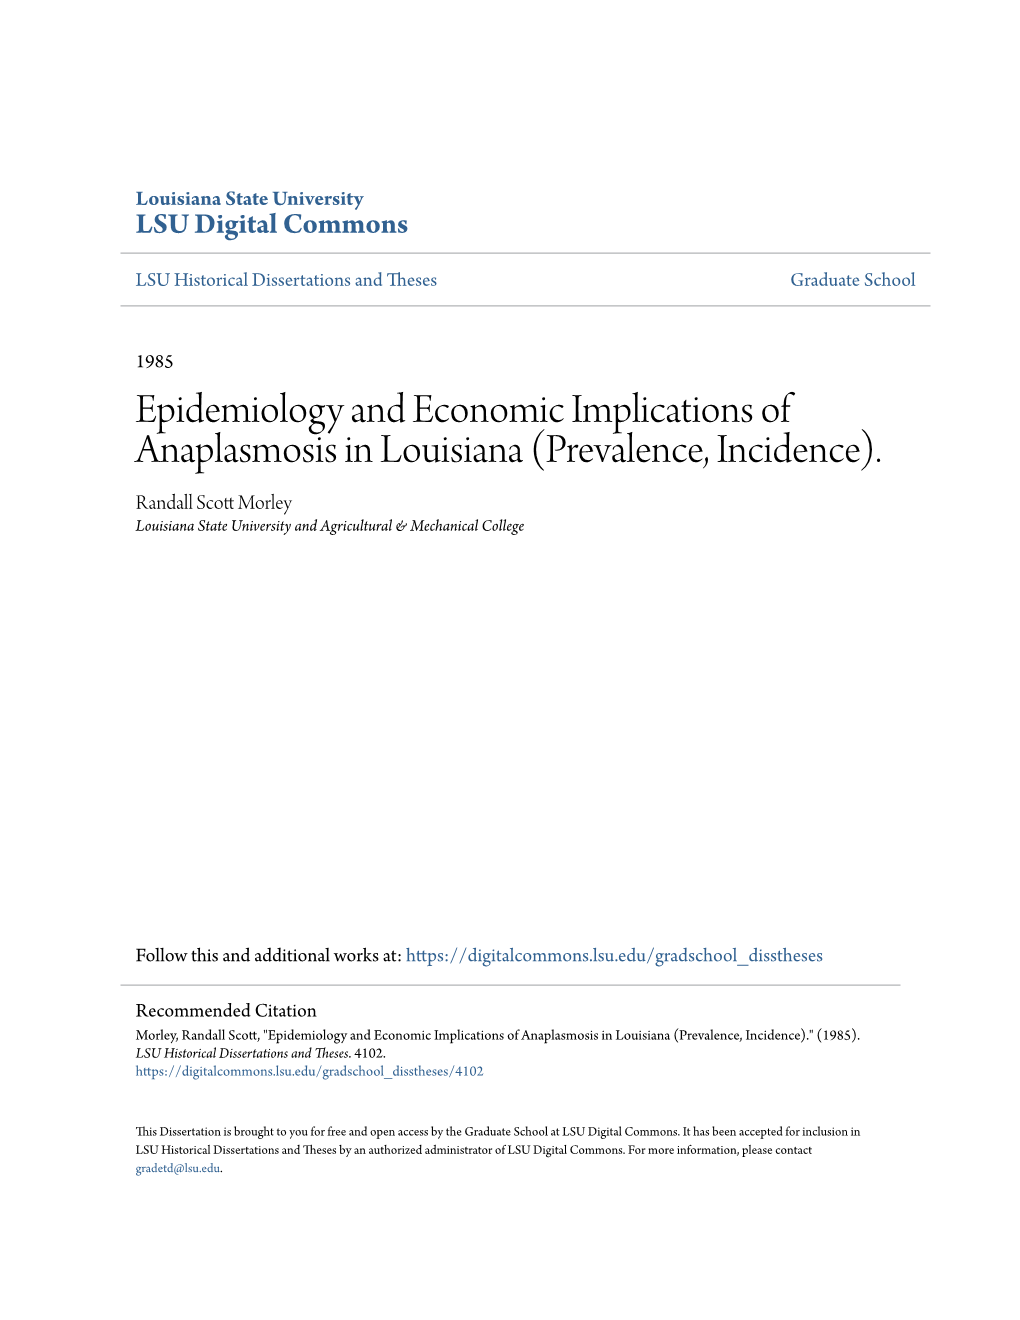 Epidemiology and Economic Implications of Anaplasmosis in Louisiana (Prevalence, Incidence)